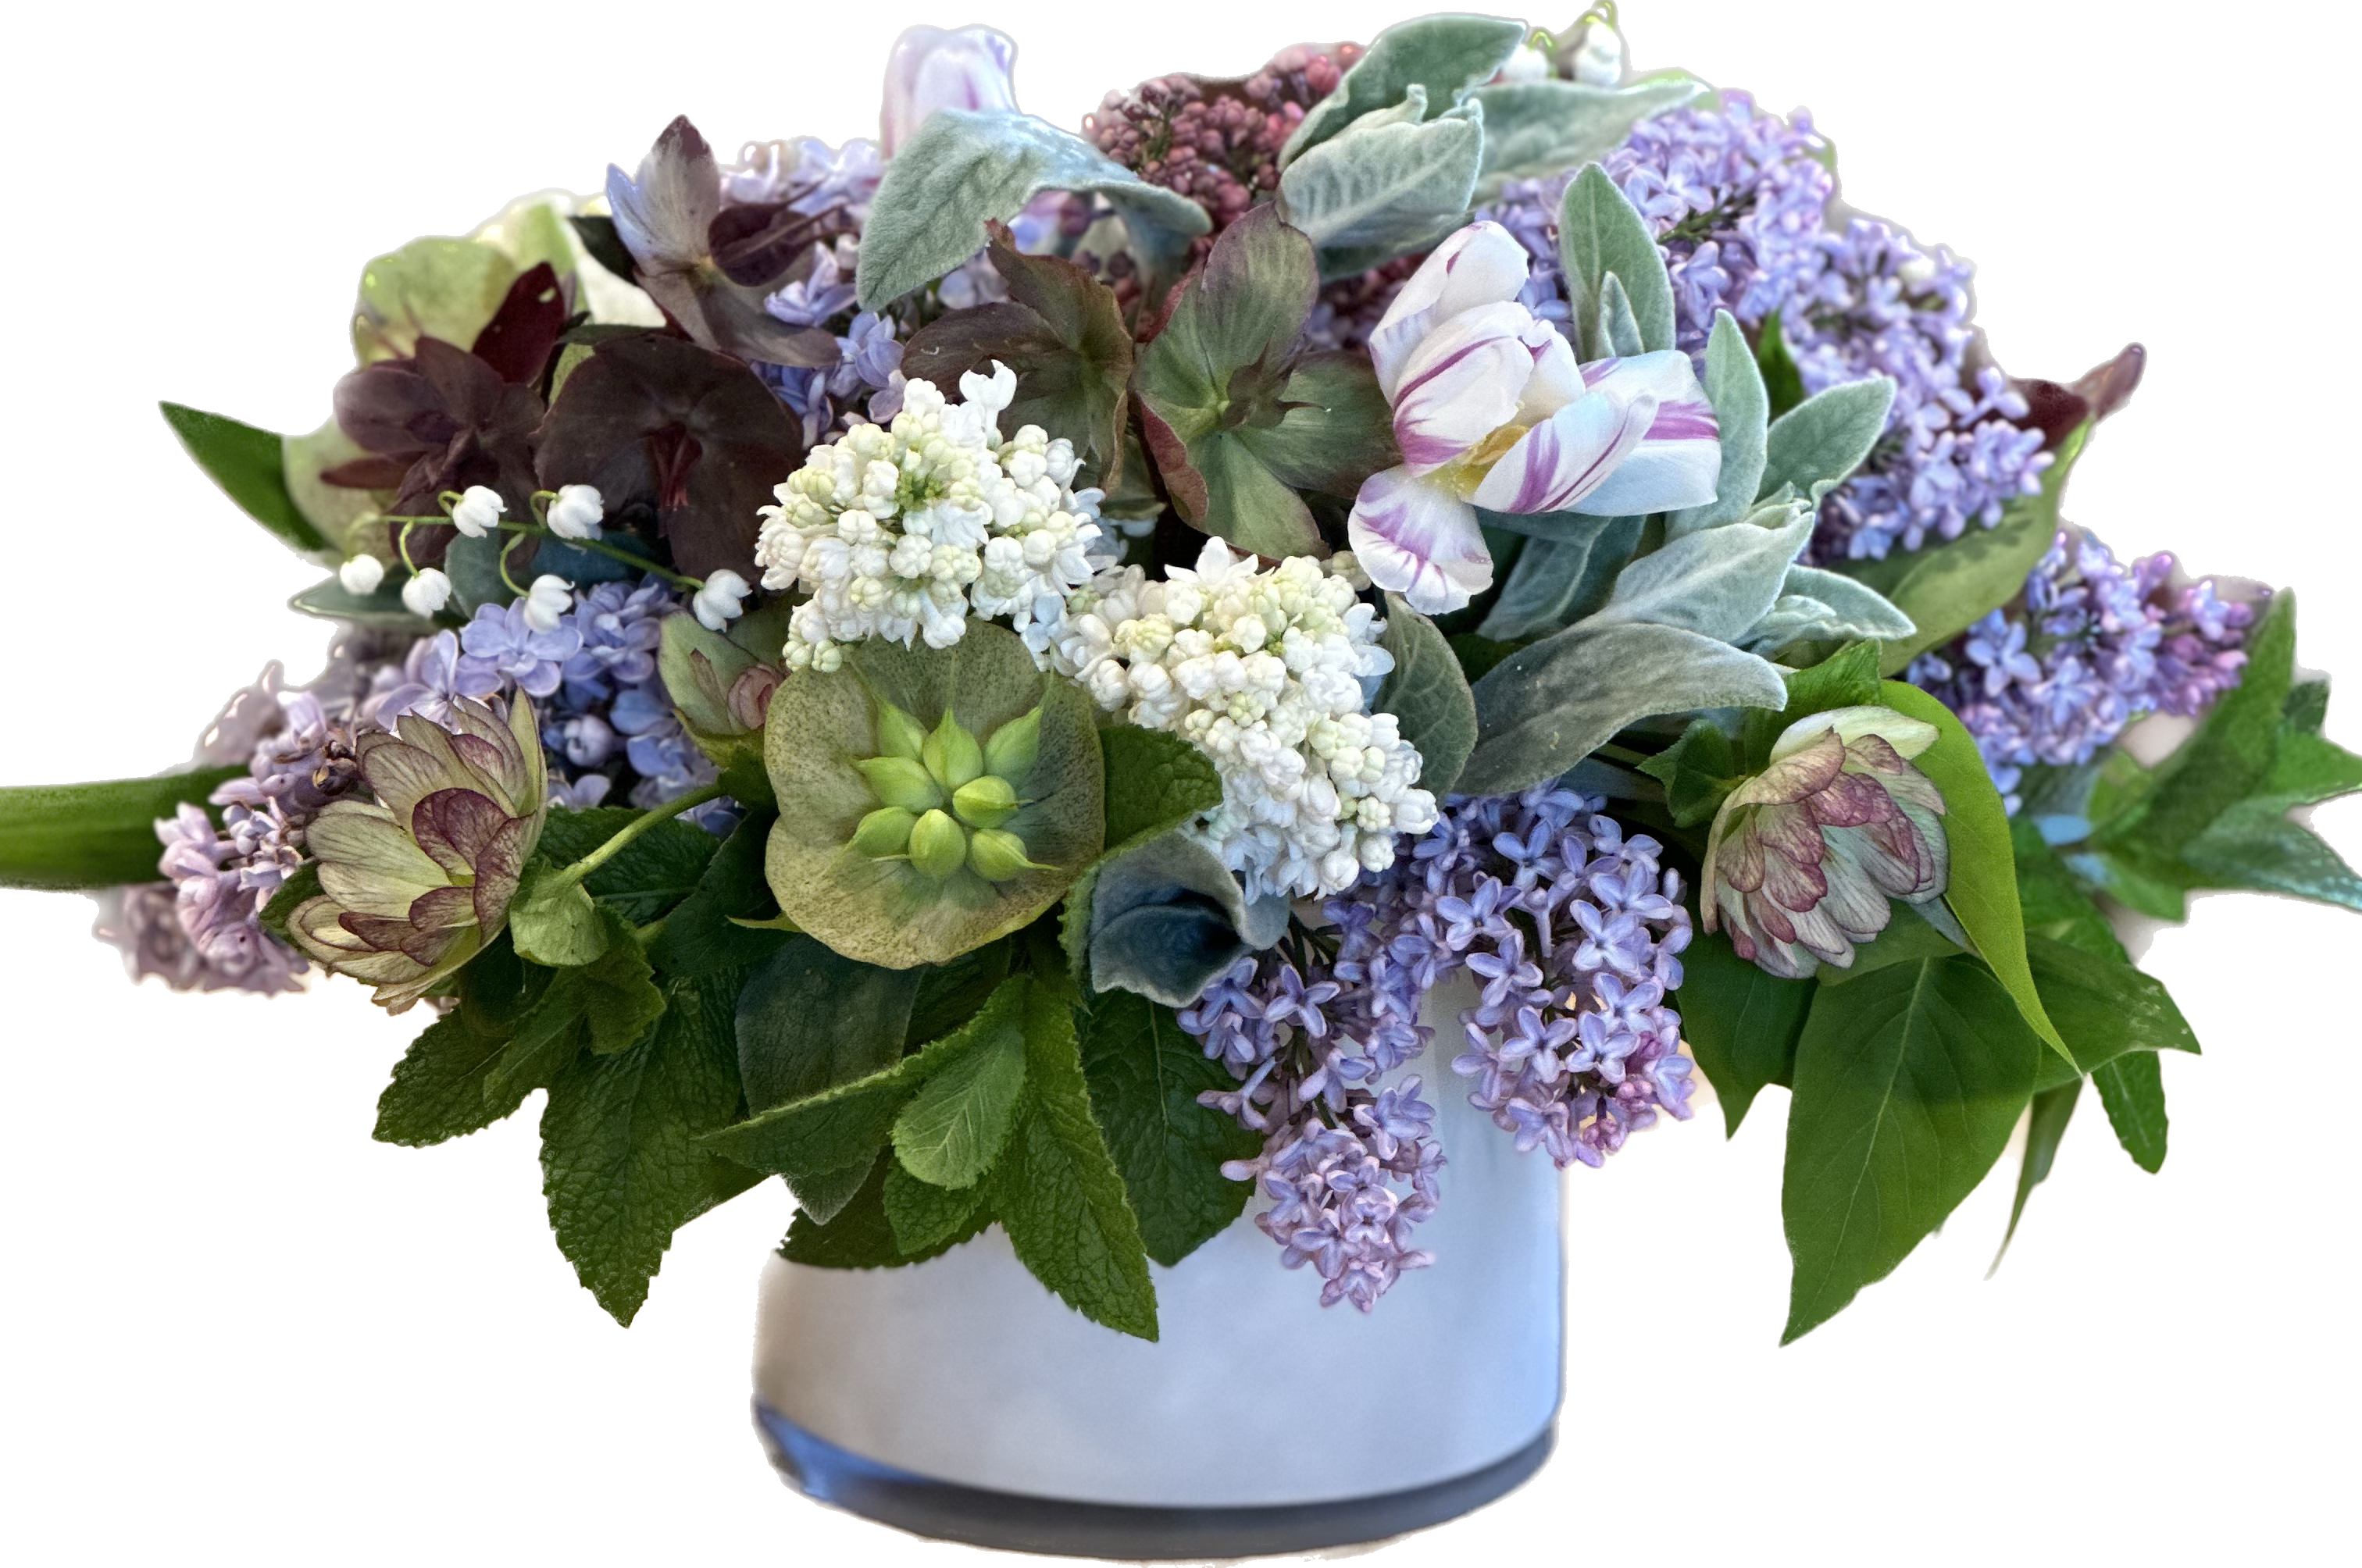 Introduction to floral design class in Snohomish Seattle Washington